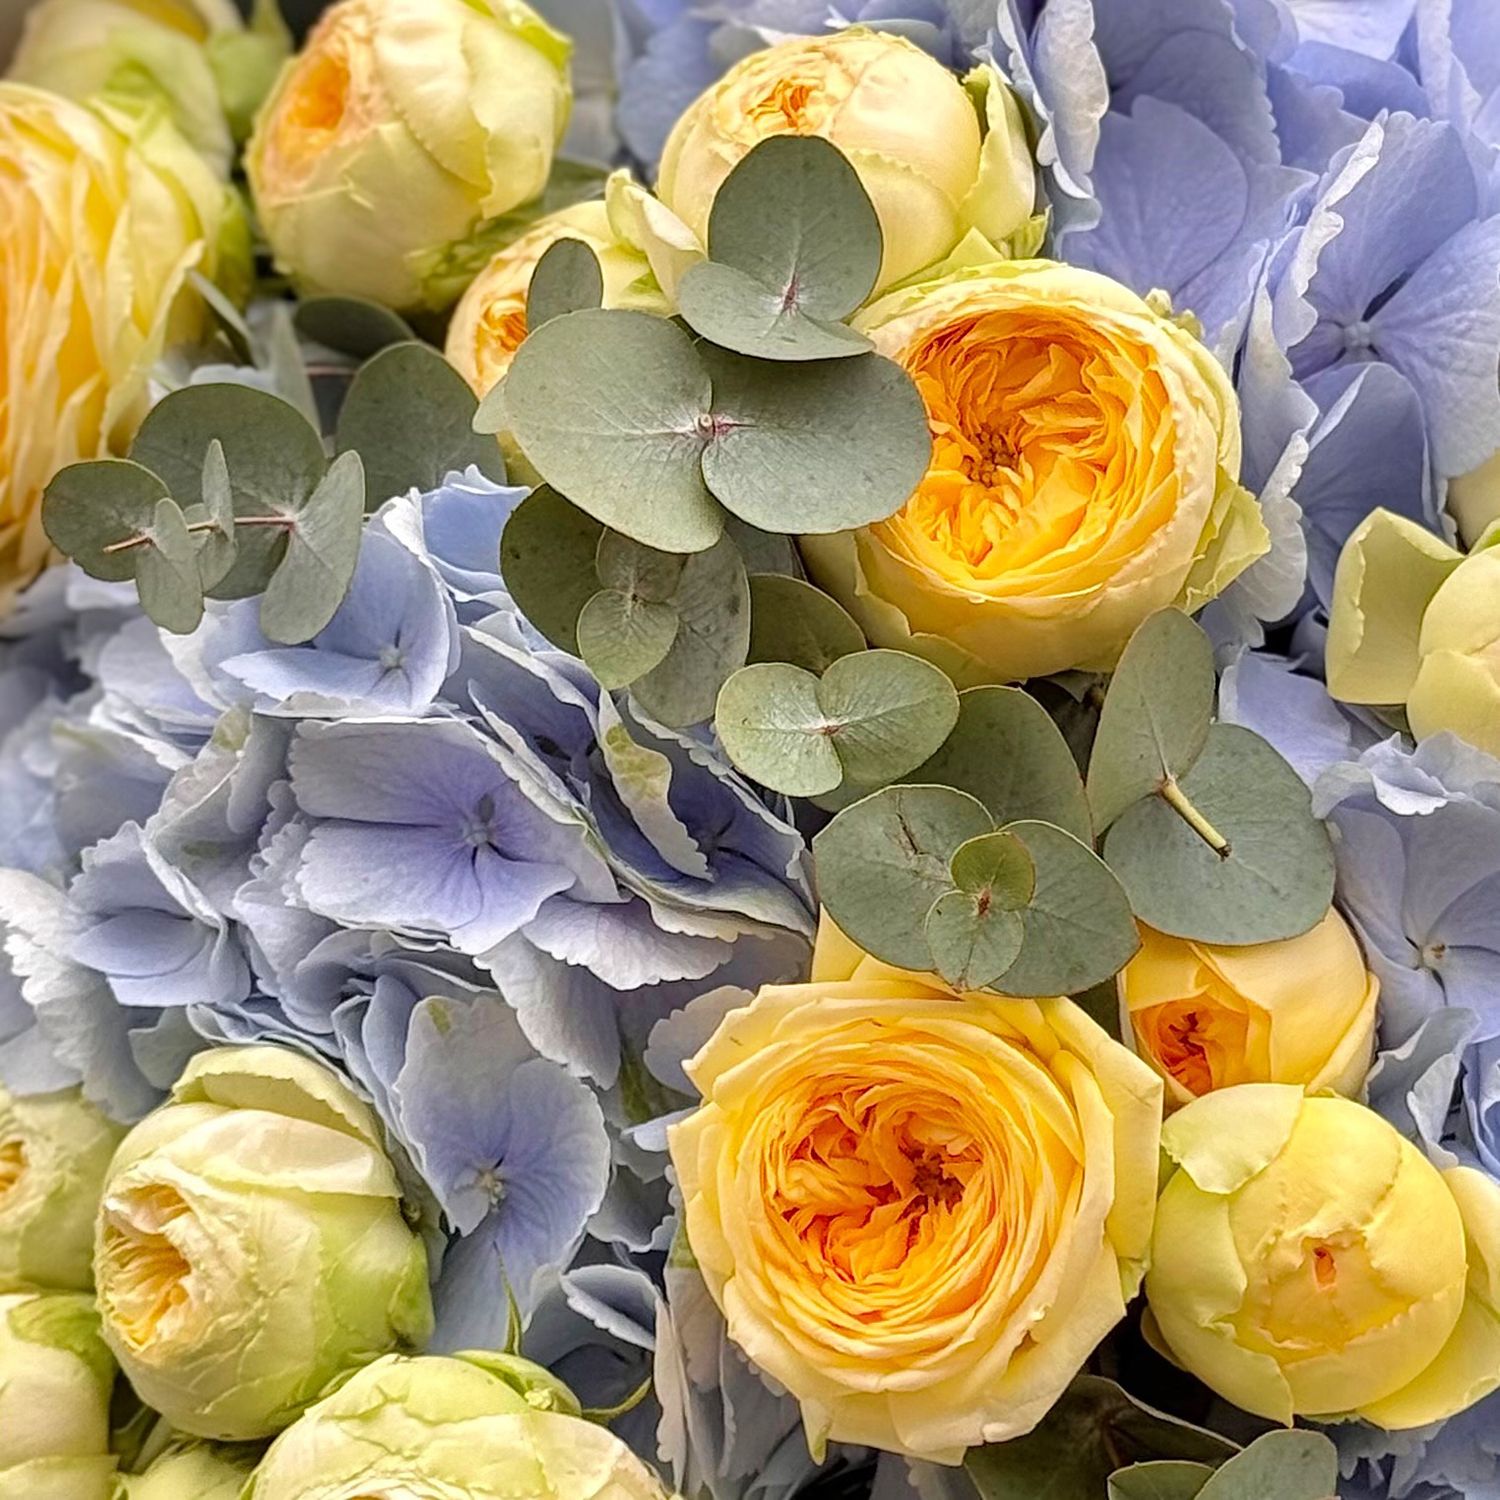 Blue hydrangea and yellow roses